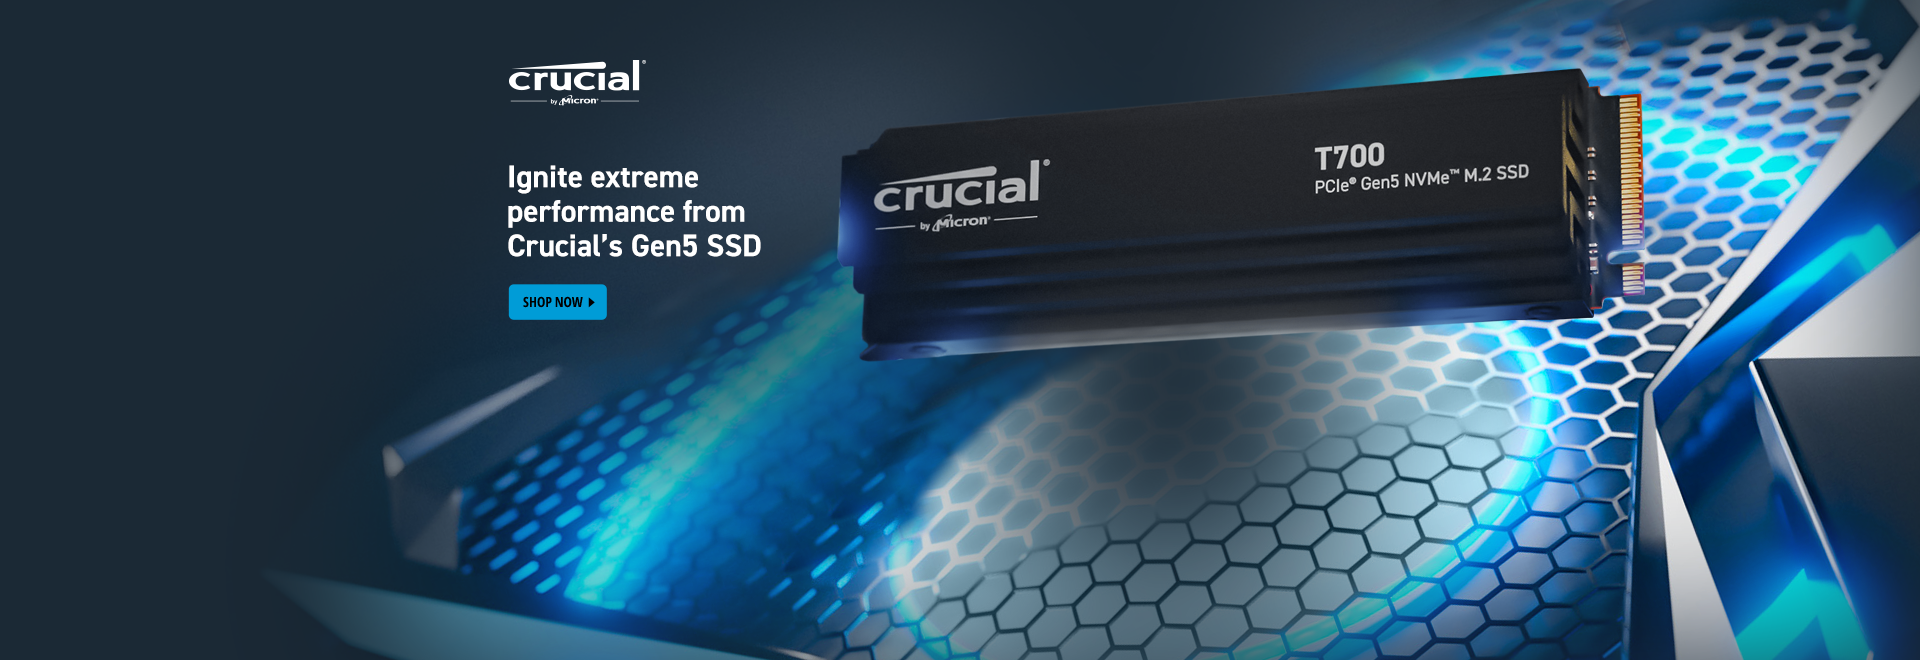 Ignite extreme performance from Crucial’s Gen5 SSD